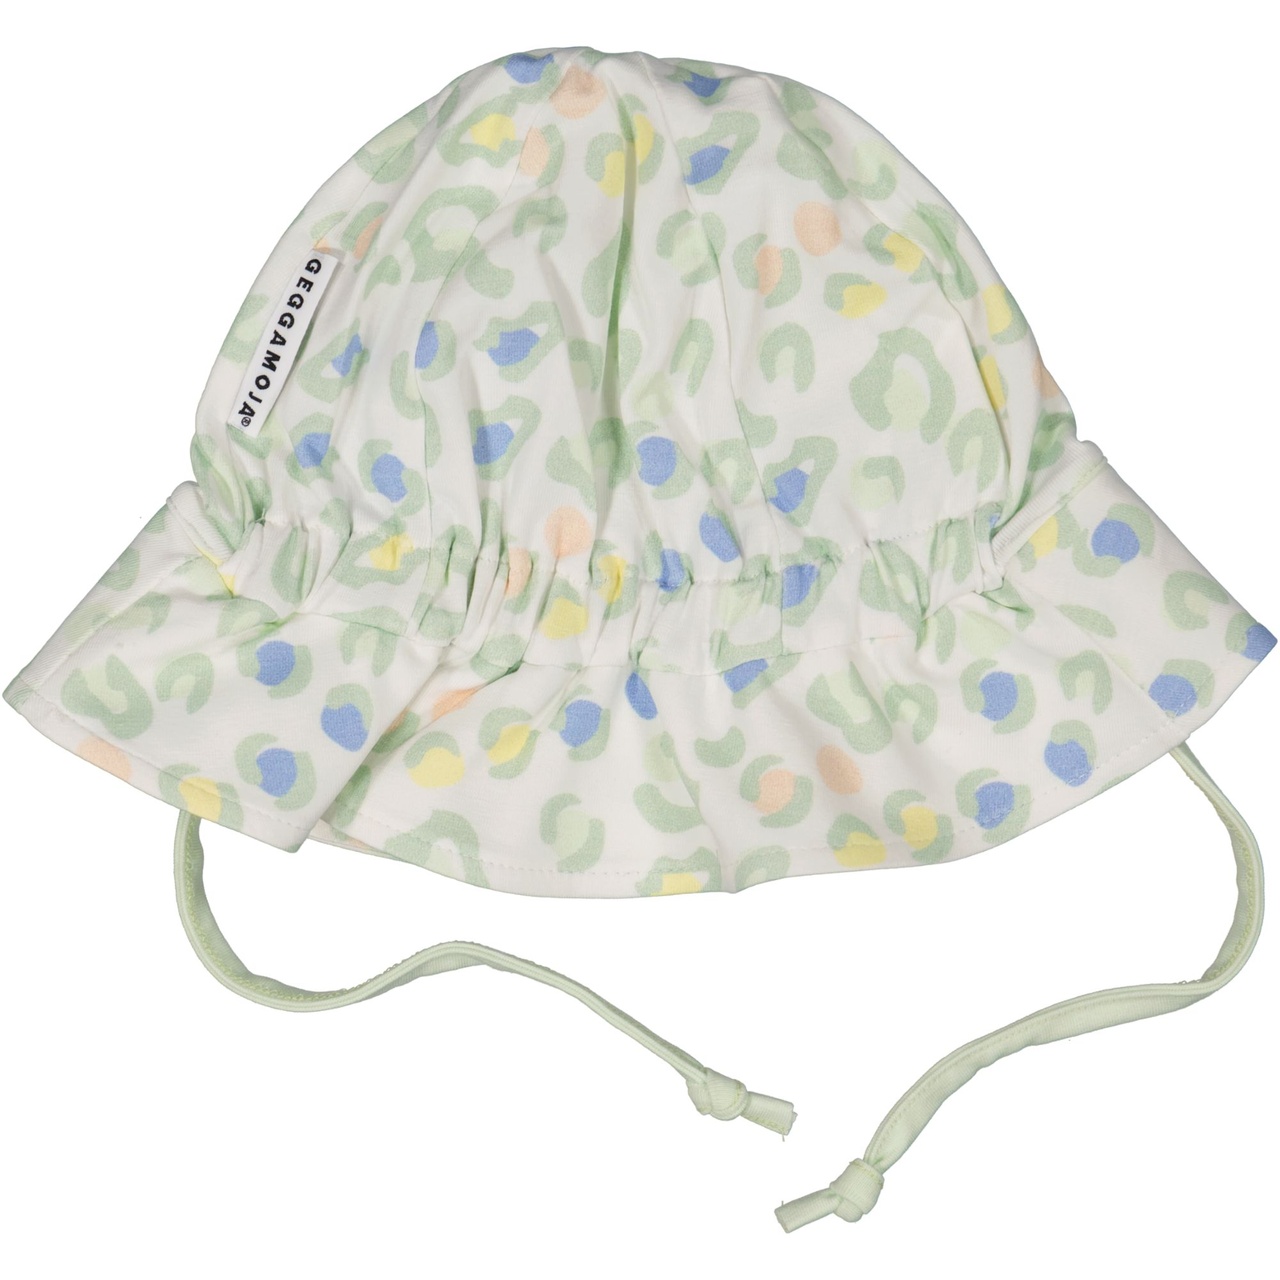 Bamboo Sunny hat Leo colored 01 10m-2Y